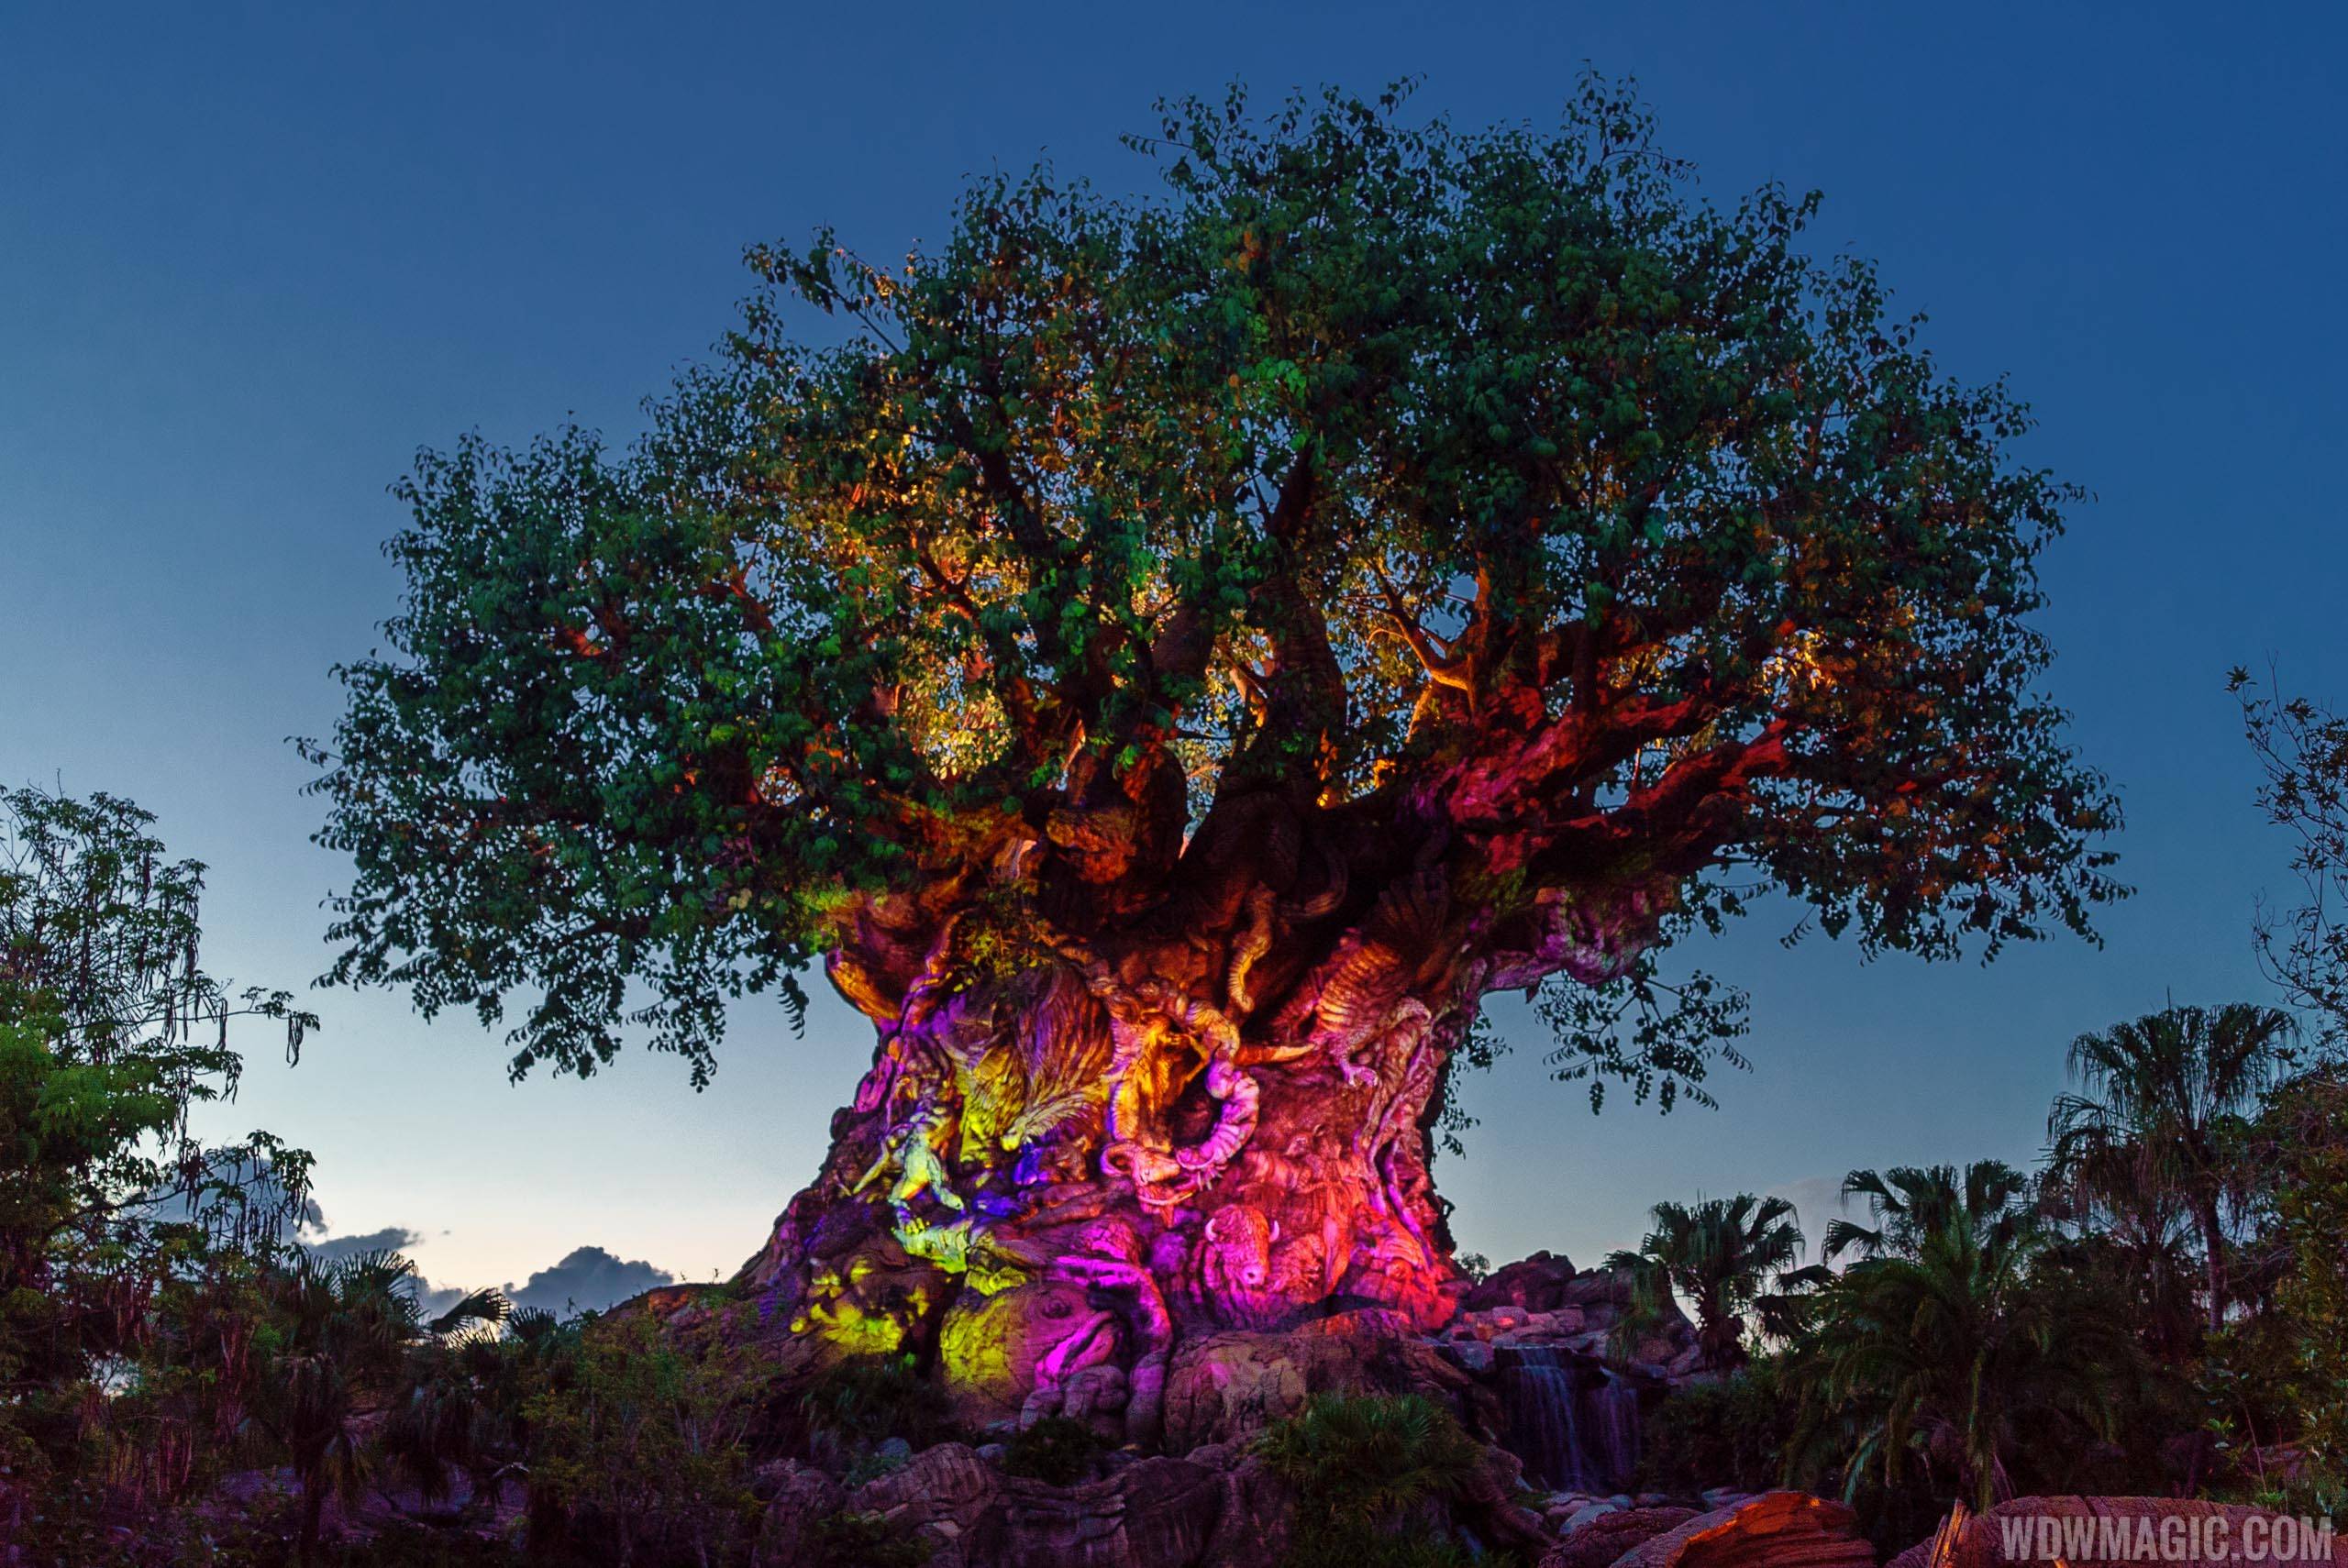 First look at the the Tree of Life 'Beacon of Magic' at Disney's Animal Kingdom